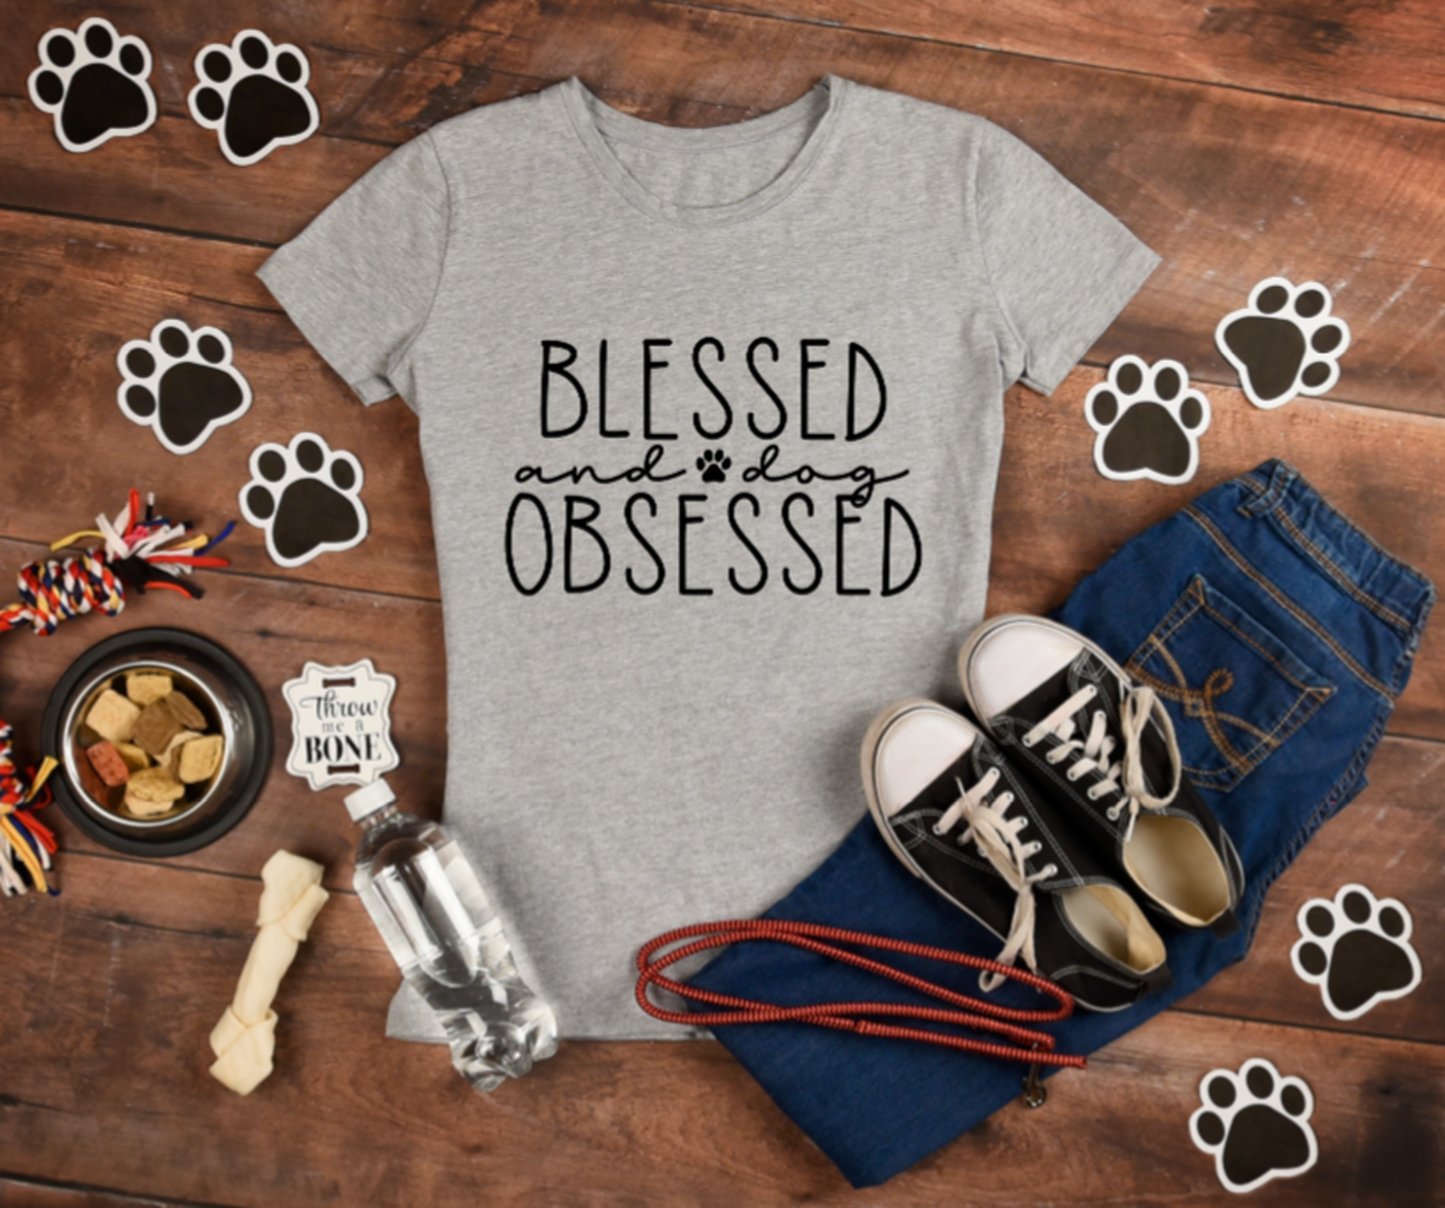 Blessed and Dog Obsessed (325°)